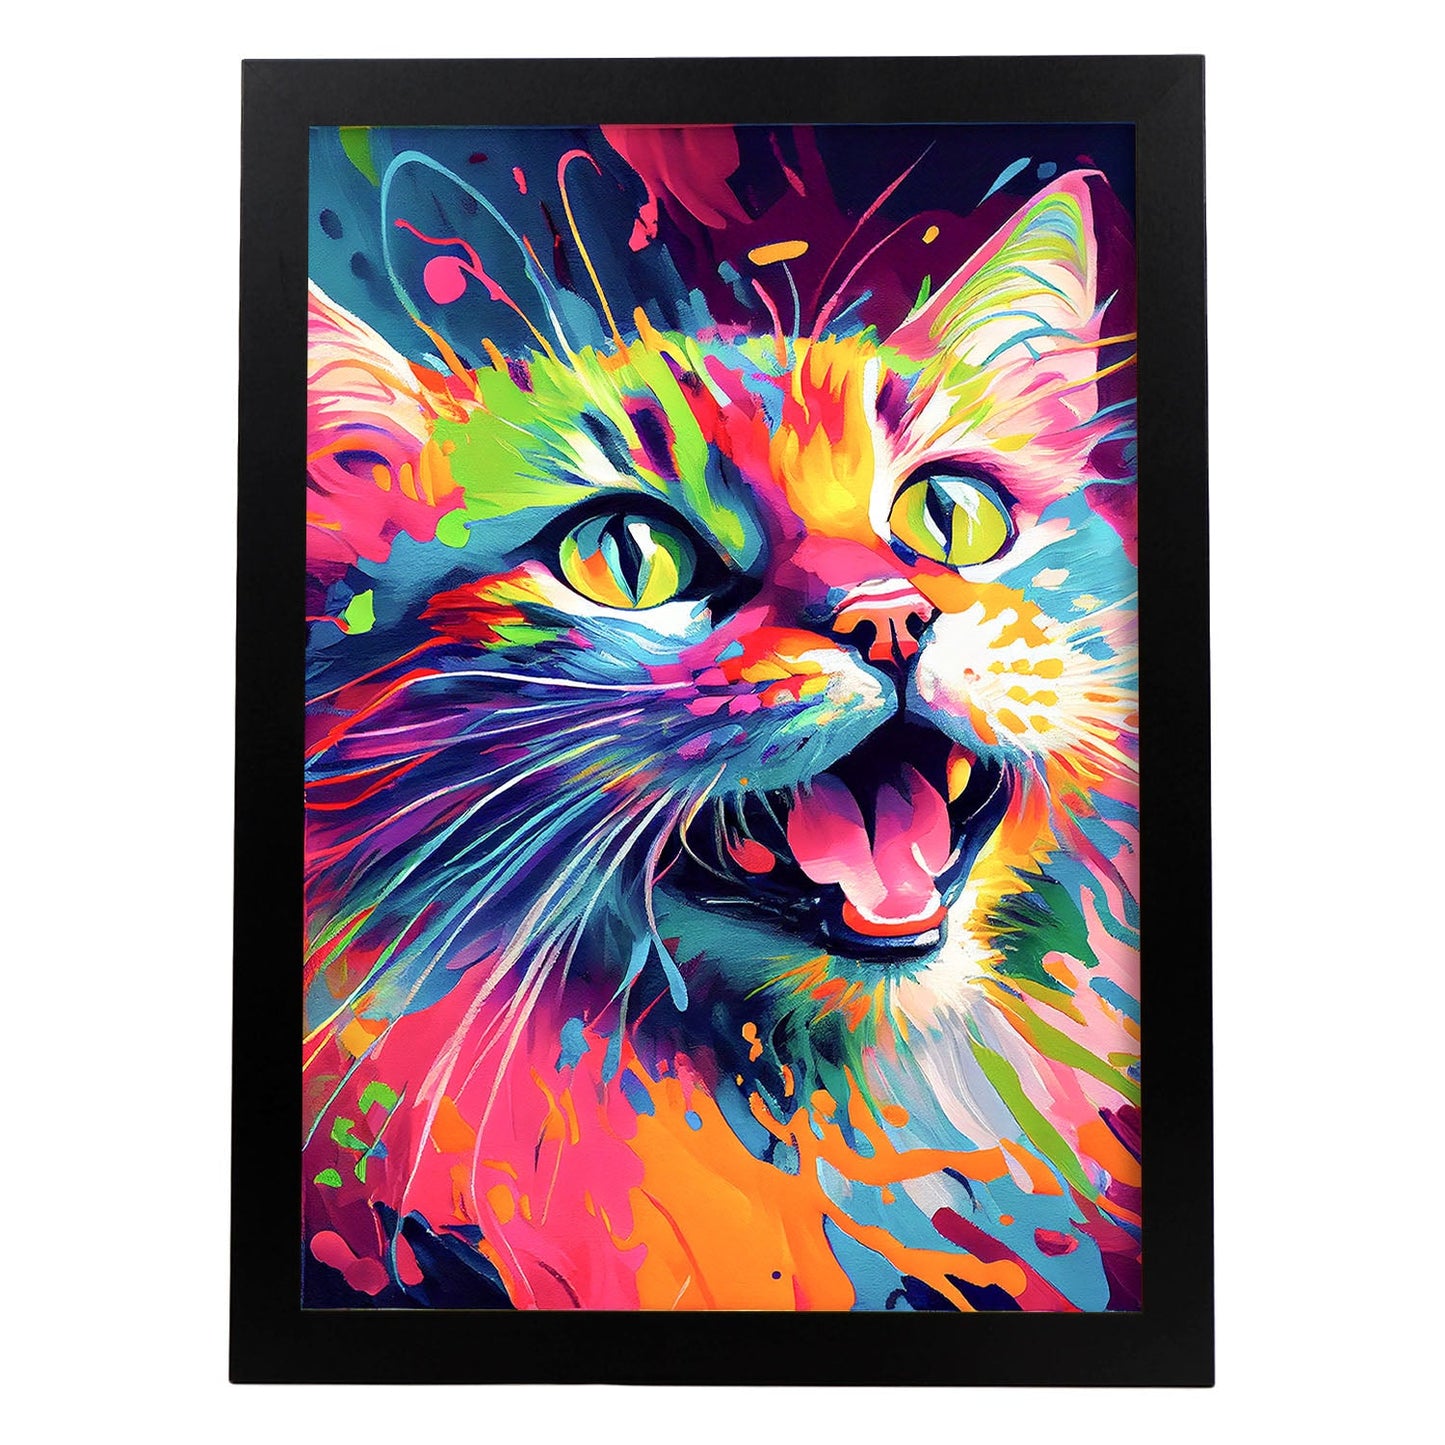 Nacnic Abstract smiling Cat in Lisa Fran Style_3. Aesthetic Wall Art Prints for Bedroom or Living Room Design.